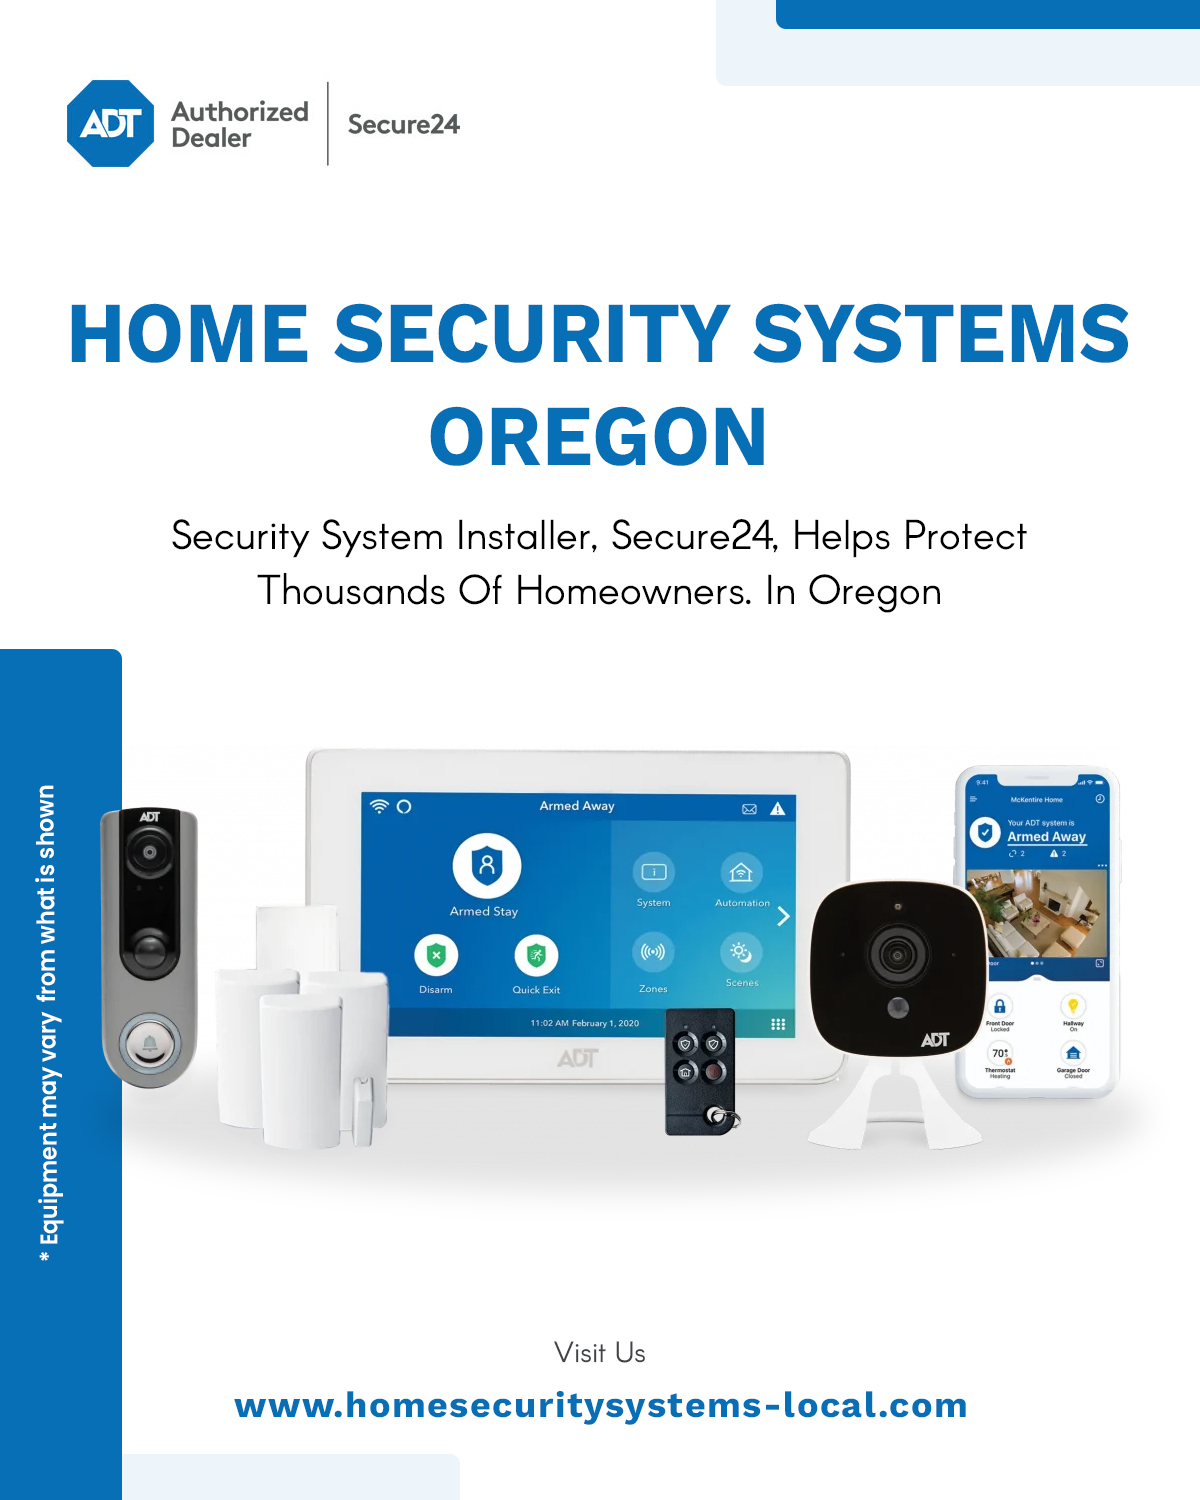 Trusted Leader In Home Security Systems In Oregon | Home Securit Blank Meme Template